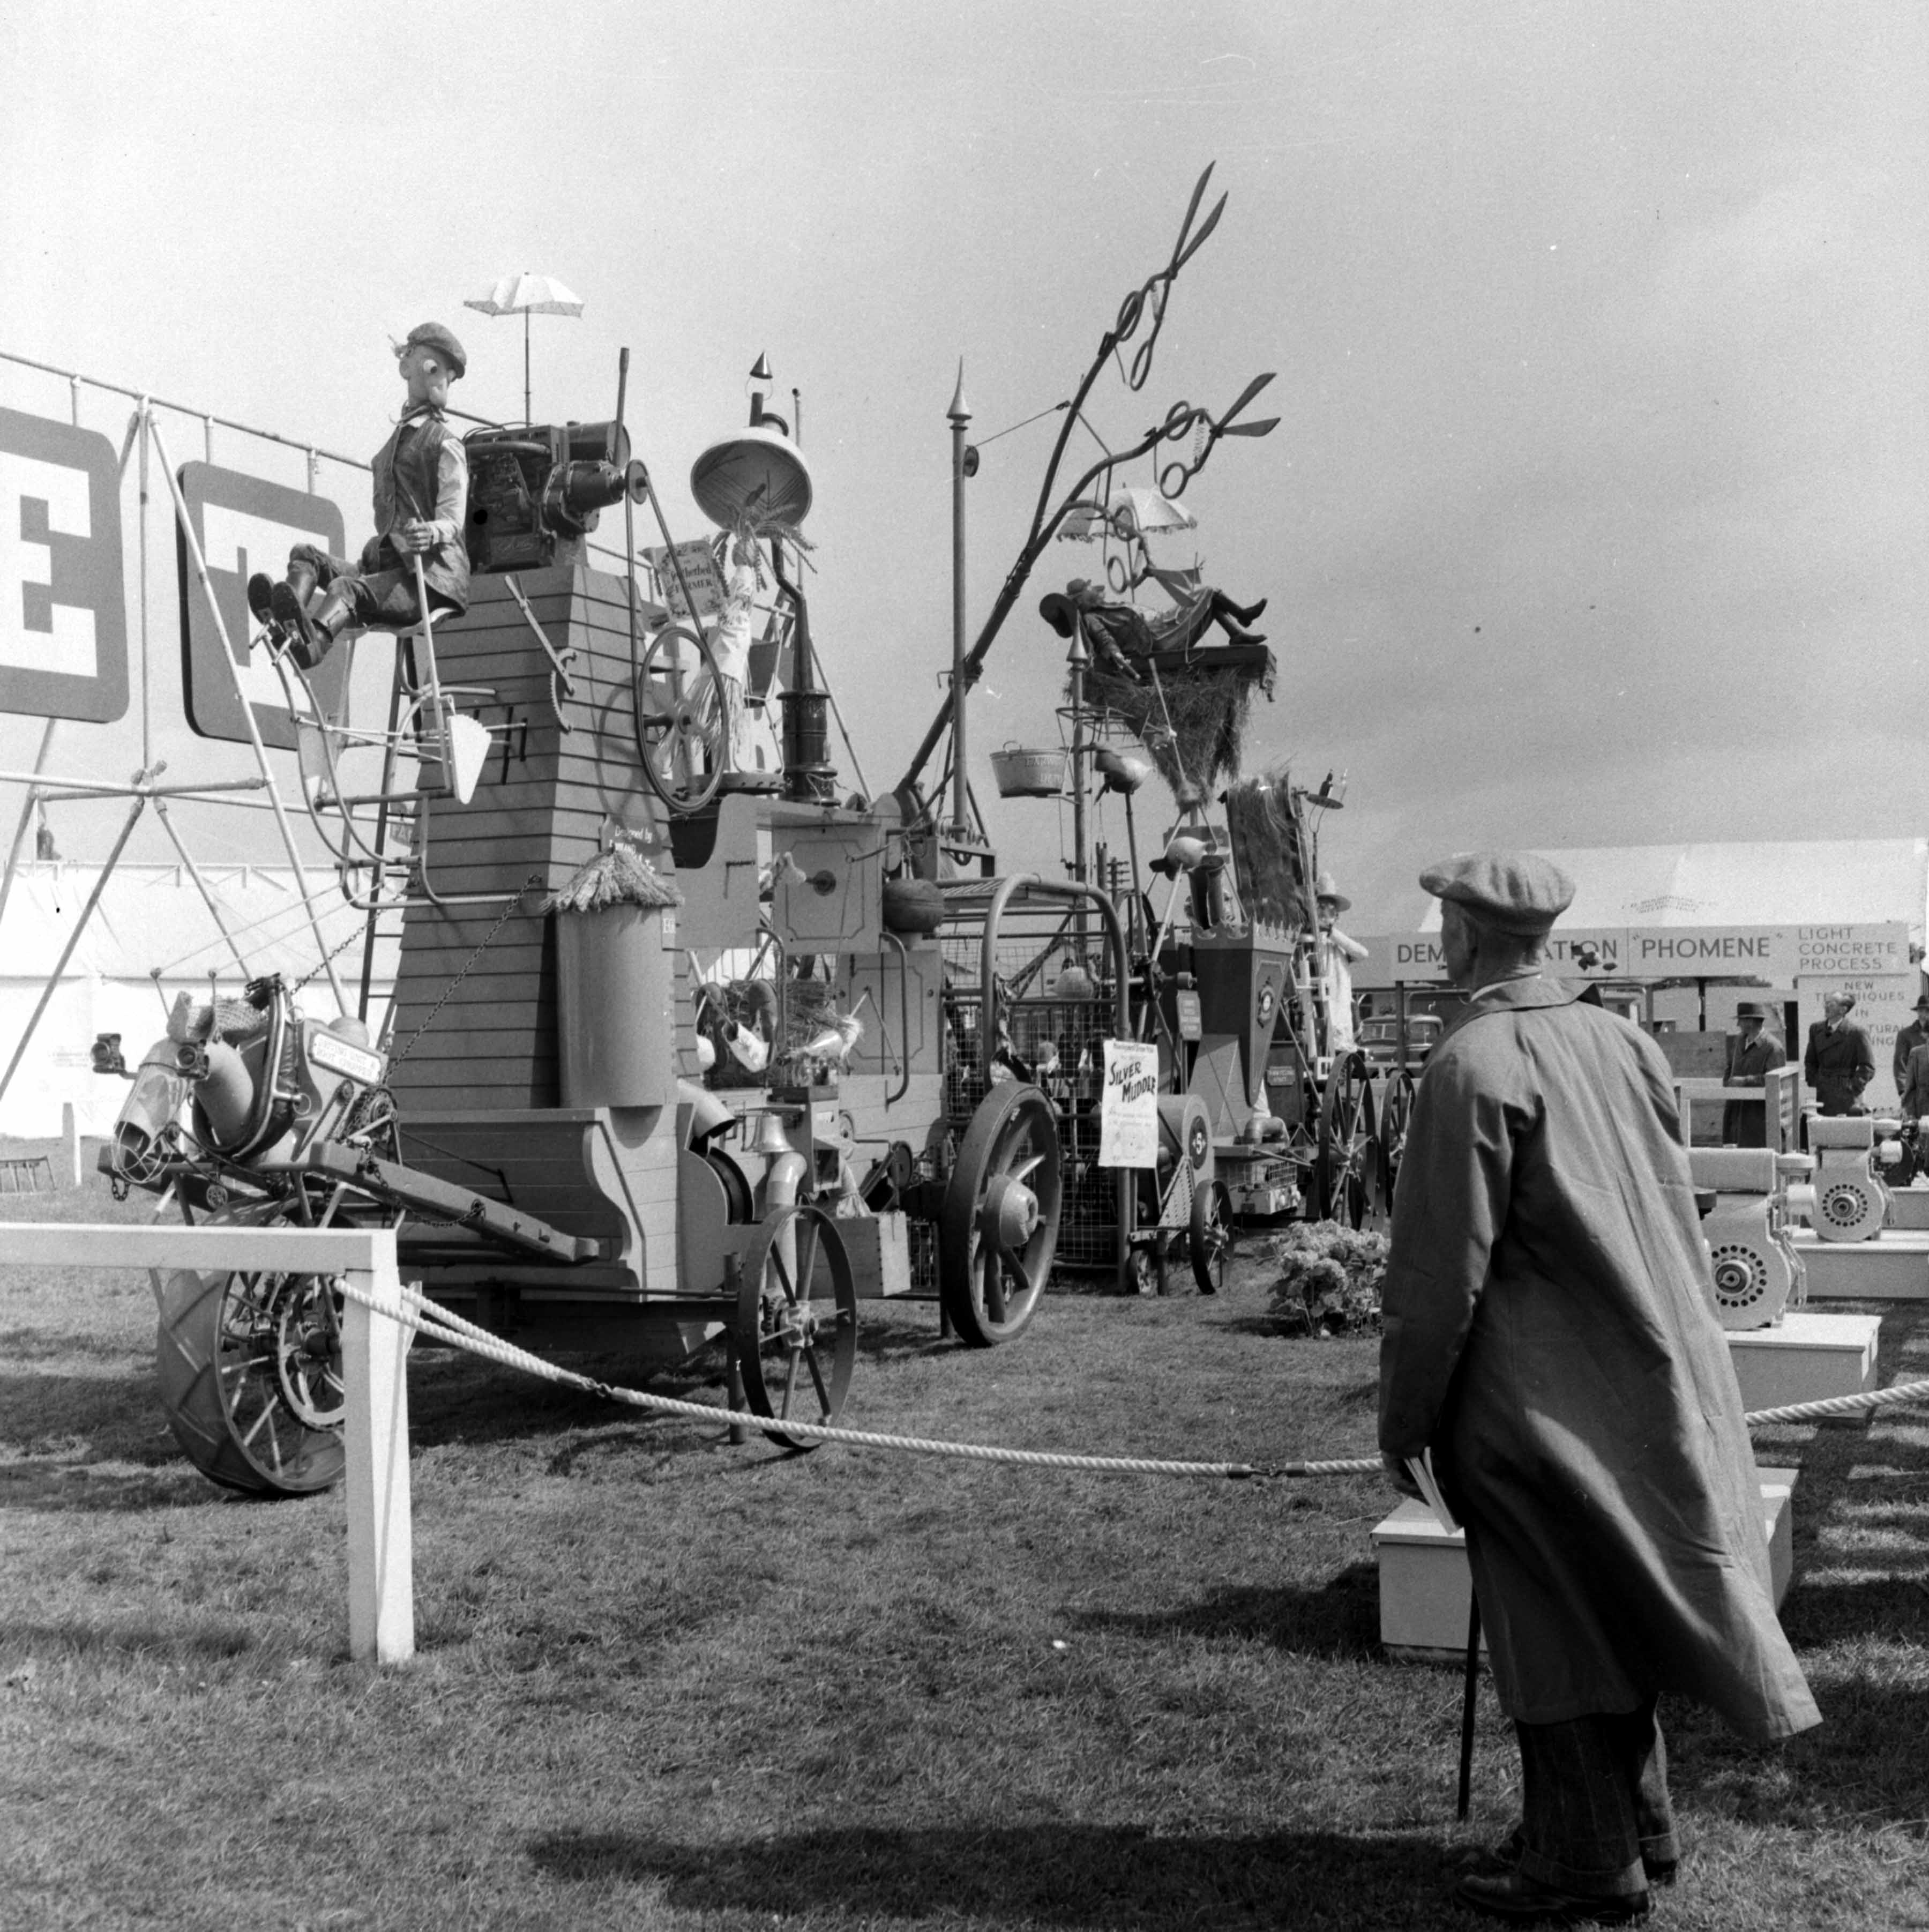 A comical contraption on display at the show a year earlier, 1956.